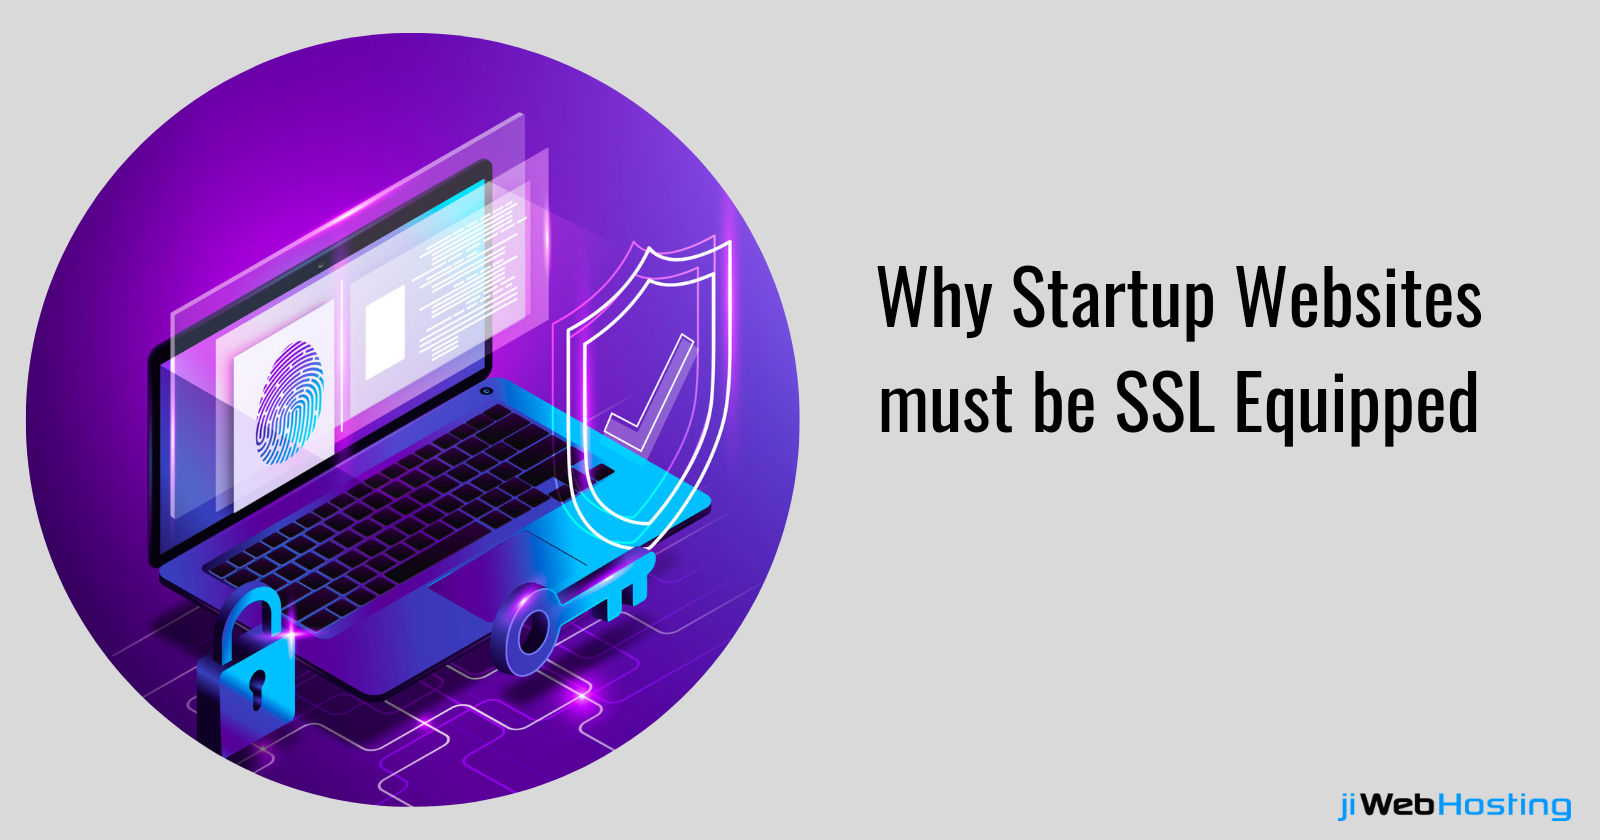 Why SSL is Important For Startup Websites?